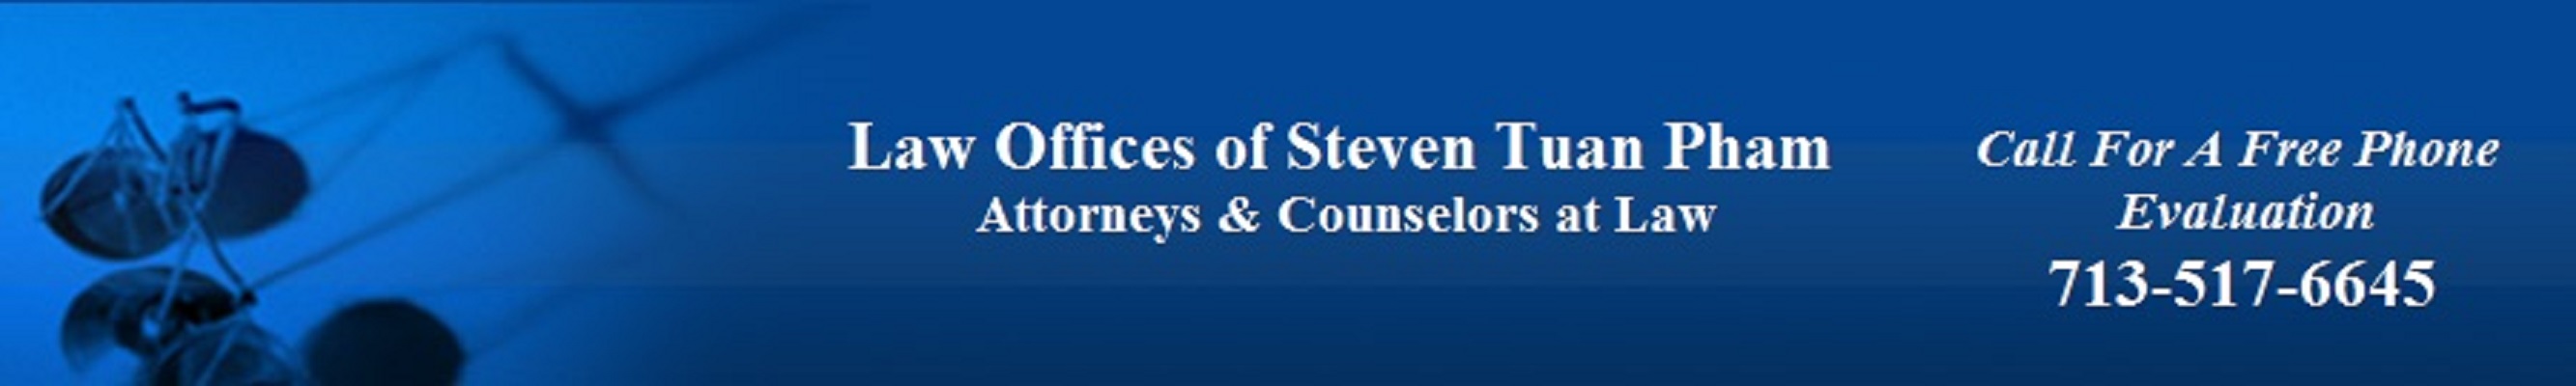 Law Offices of Steven Tuan Pham - Houston Immigration Attorneys and Houston Immigration Lawyers